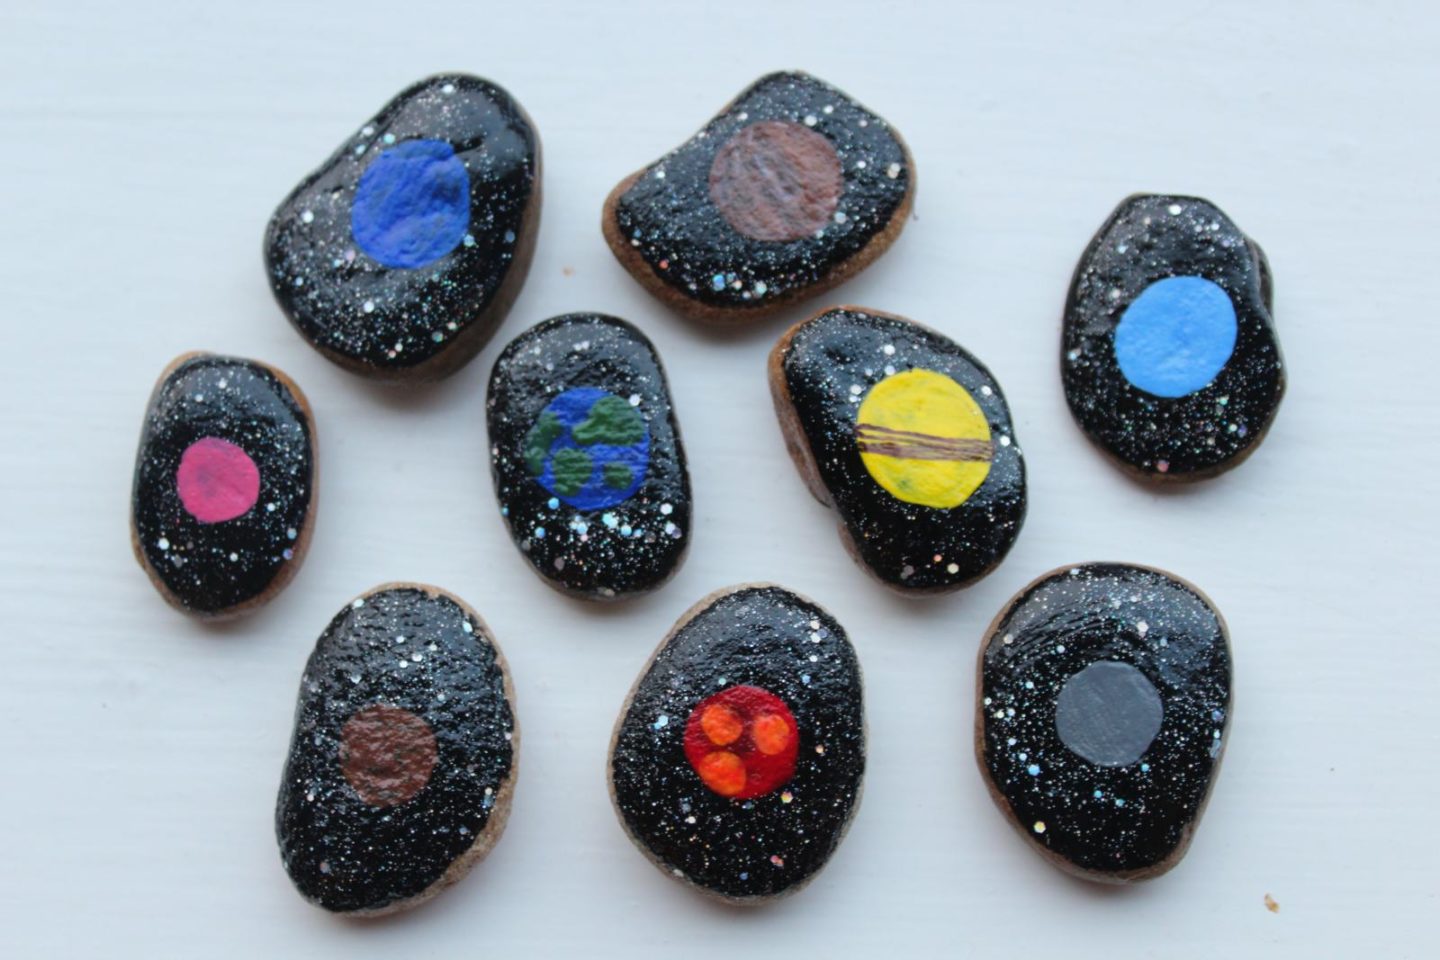 Five Favourite Painted Pebble Activities for Kids